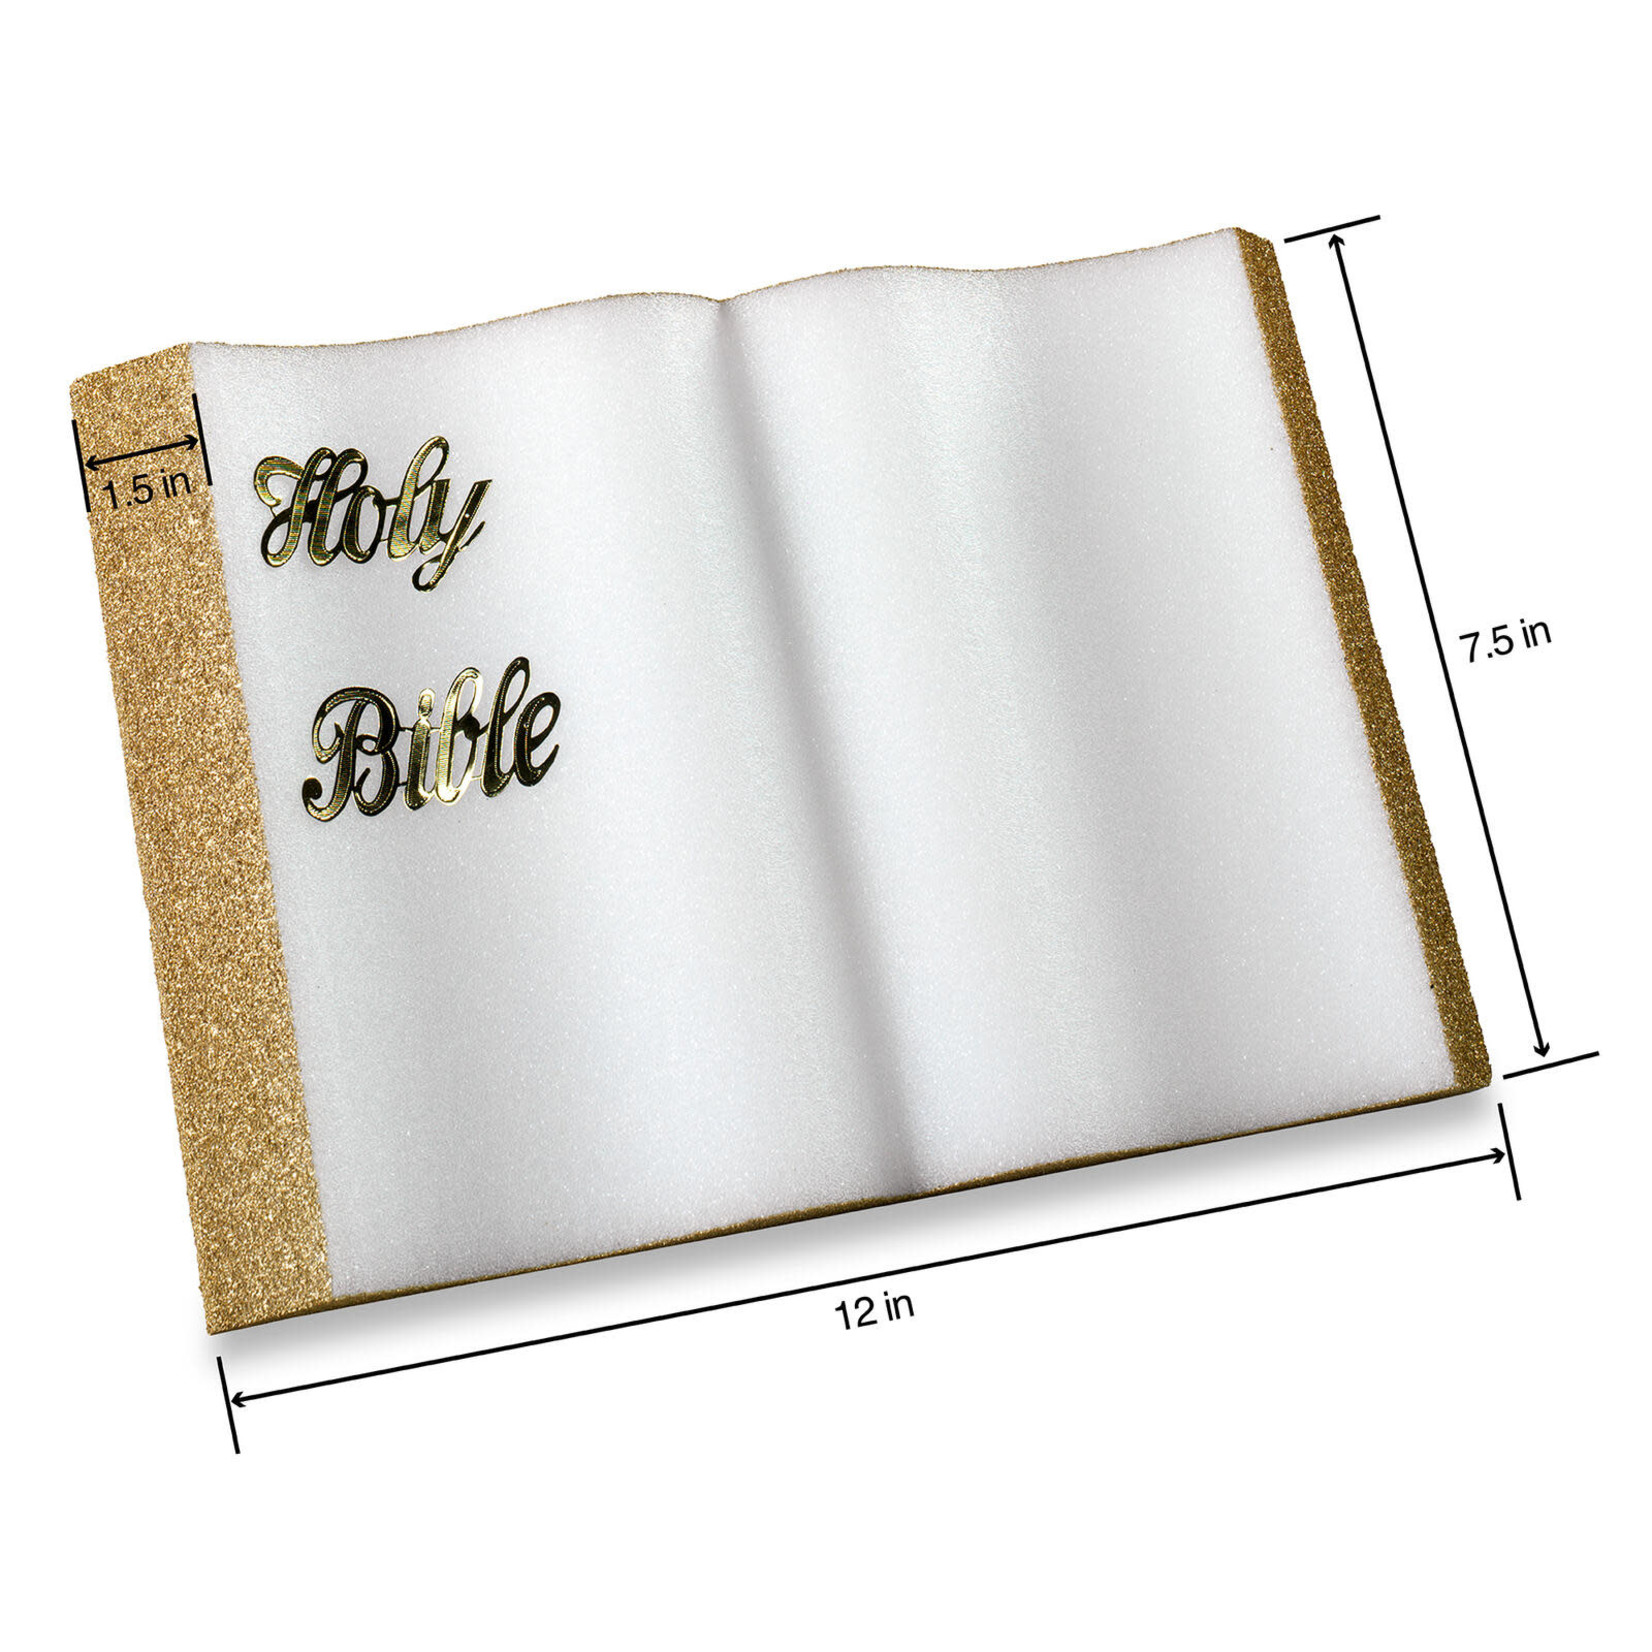 12x8x1-1/2" STYROFOAM BIBLE Gold Letters, Gold Edges, Shrink-Wrapped - White